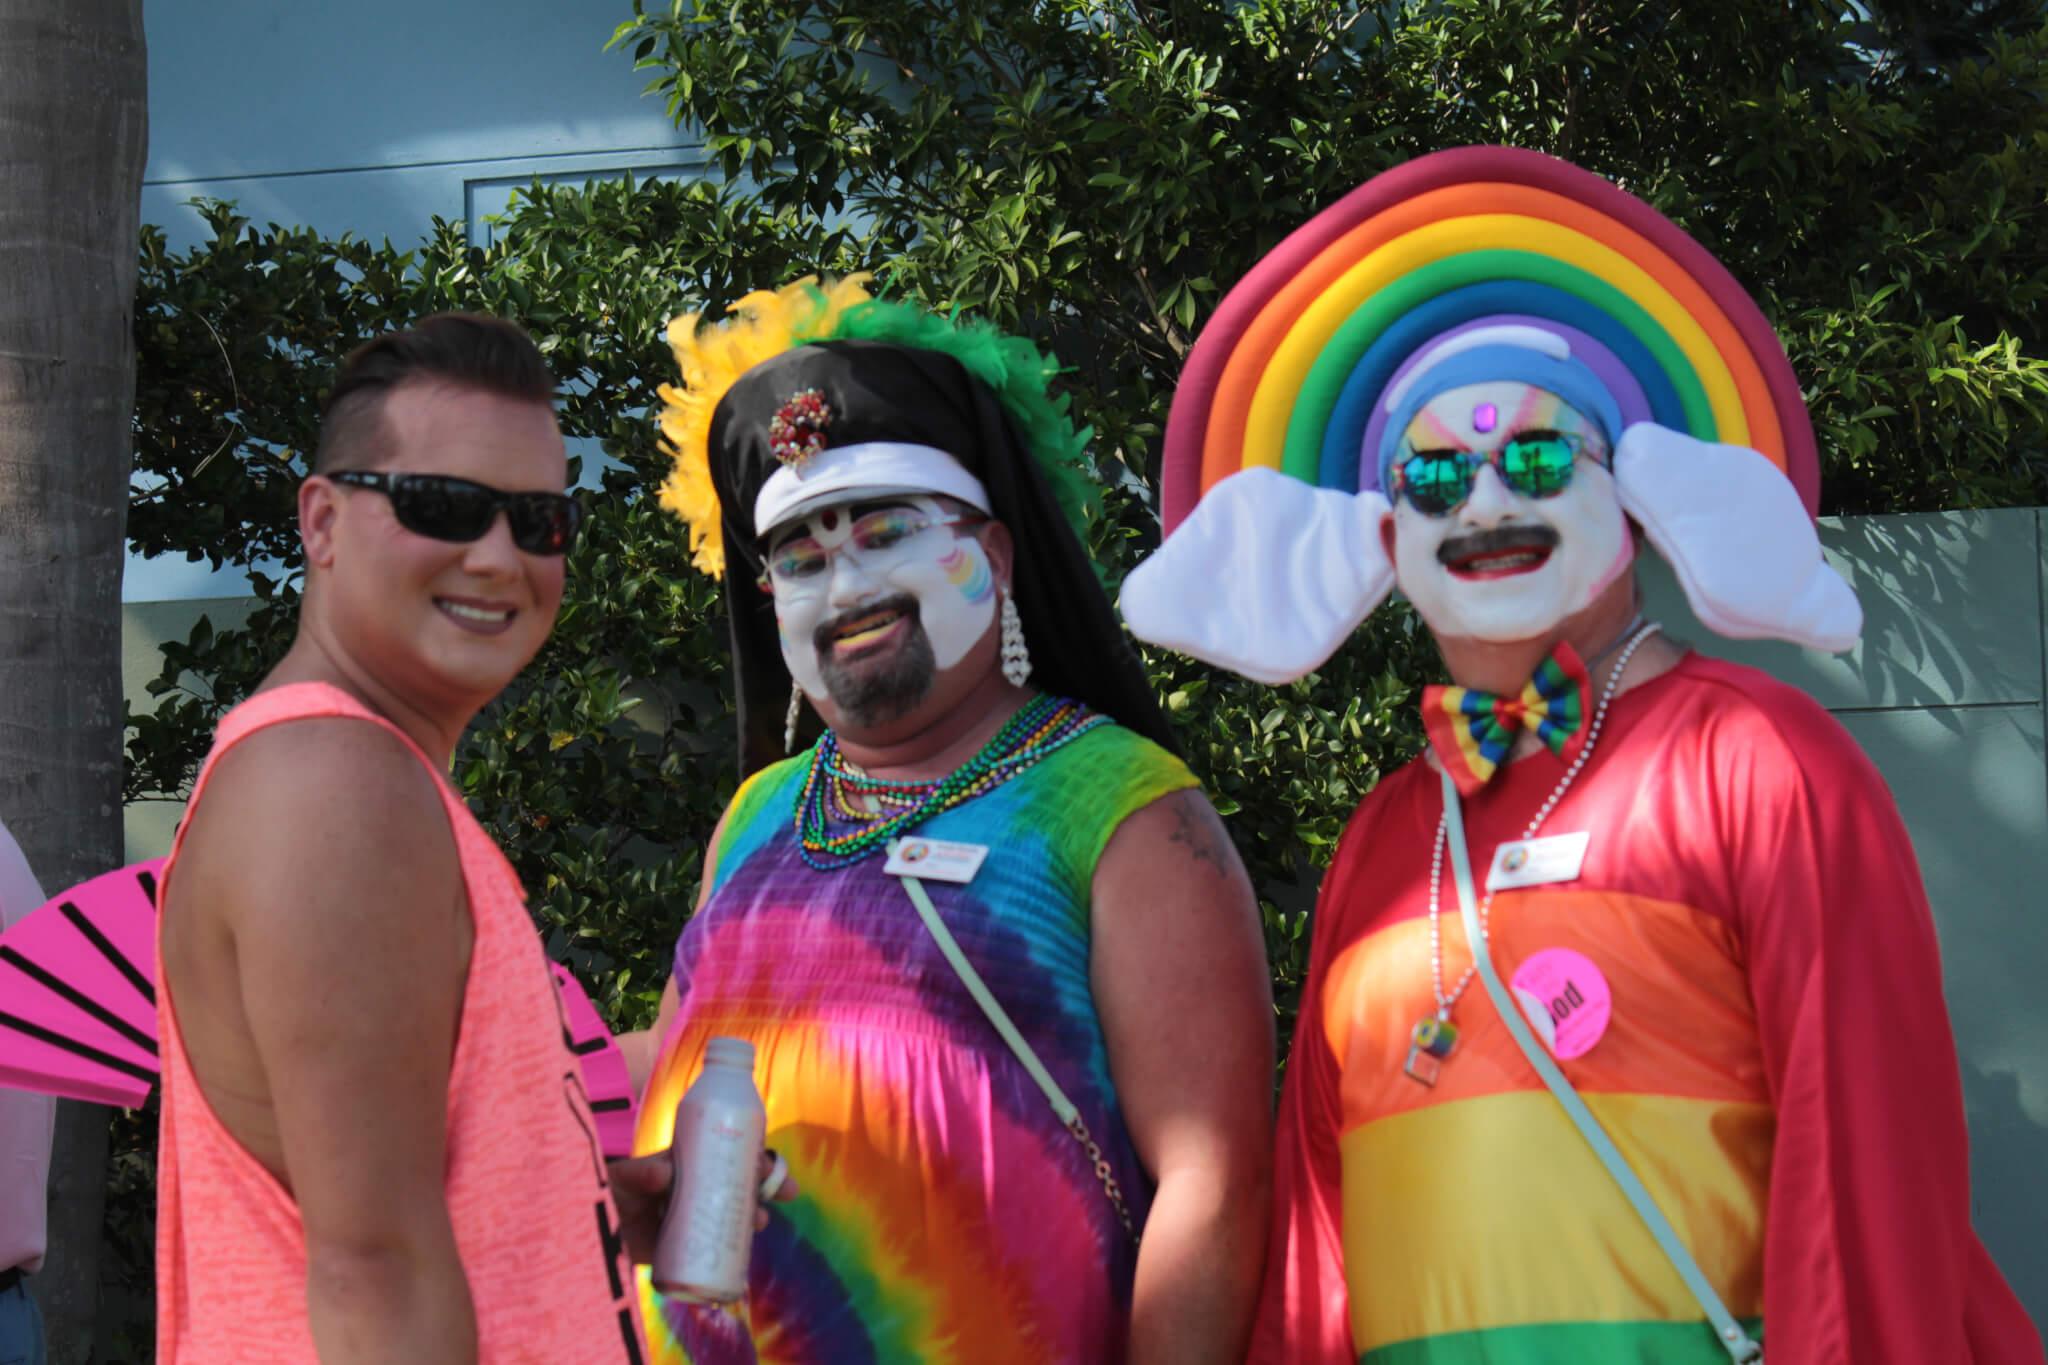 Alliance for the Arts hosts the SWFL Pride Festival in Fort Myers